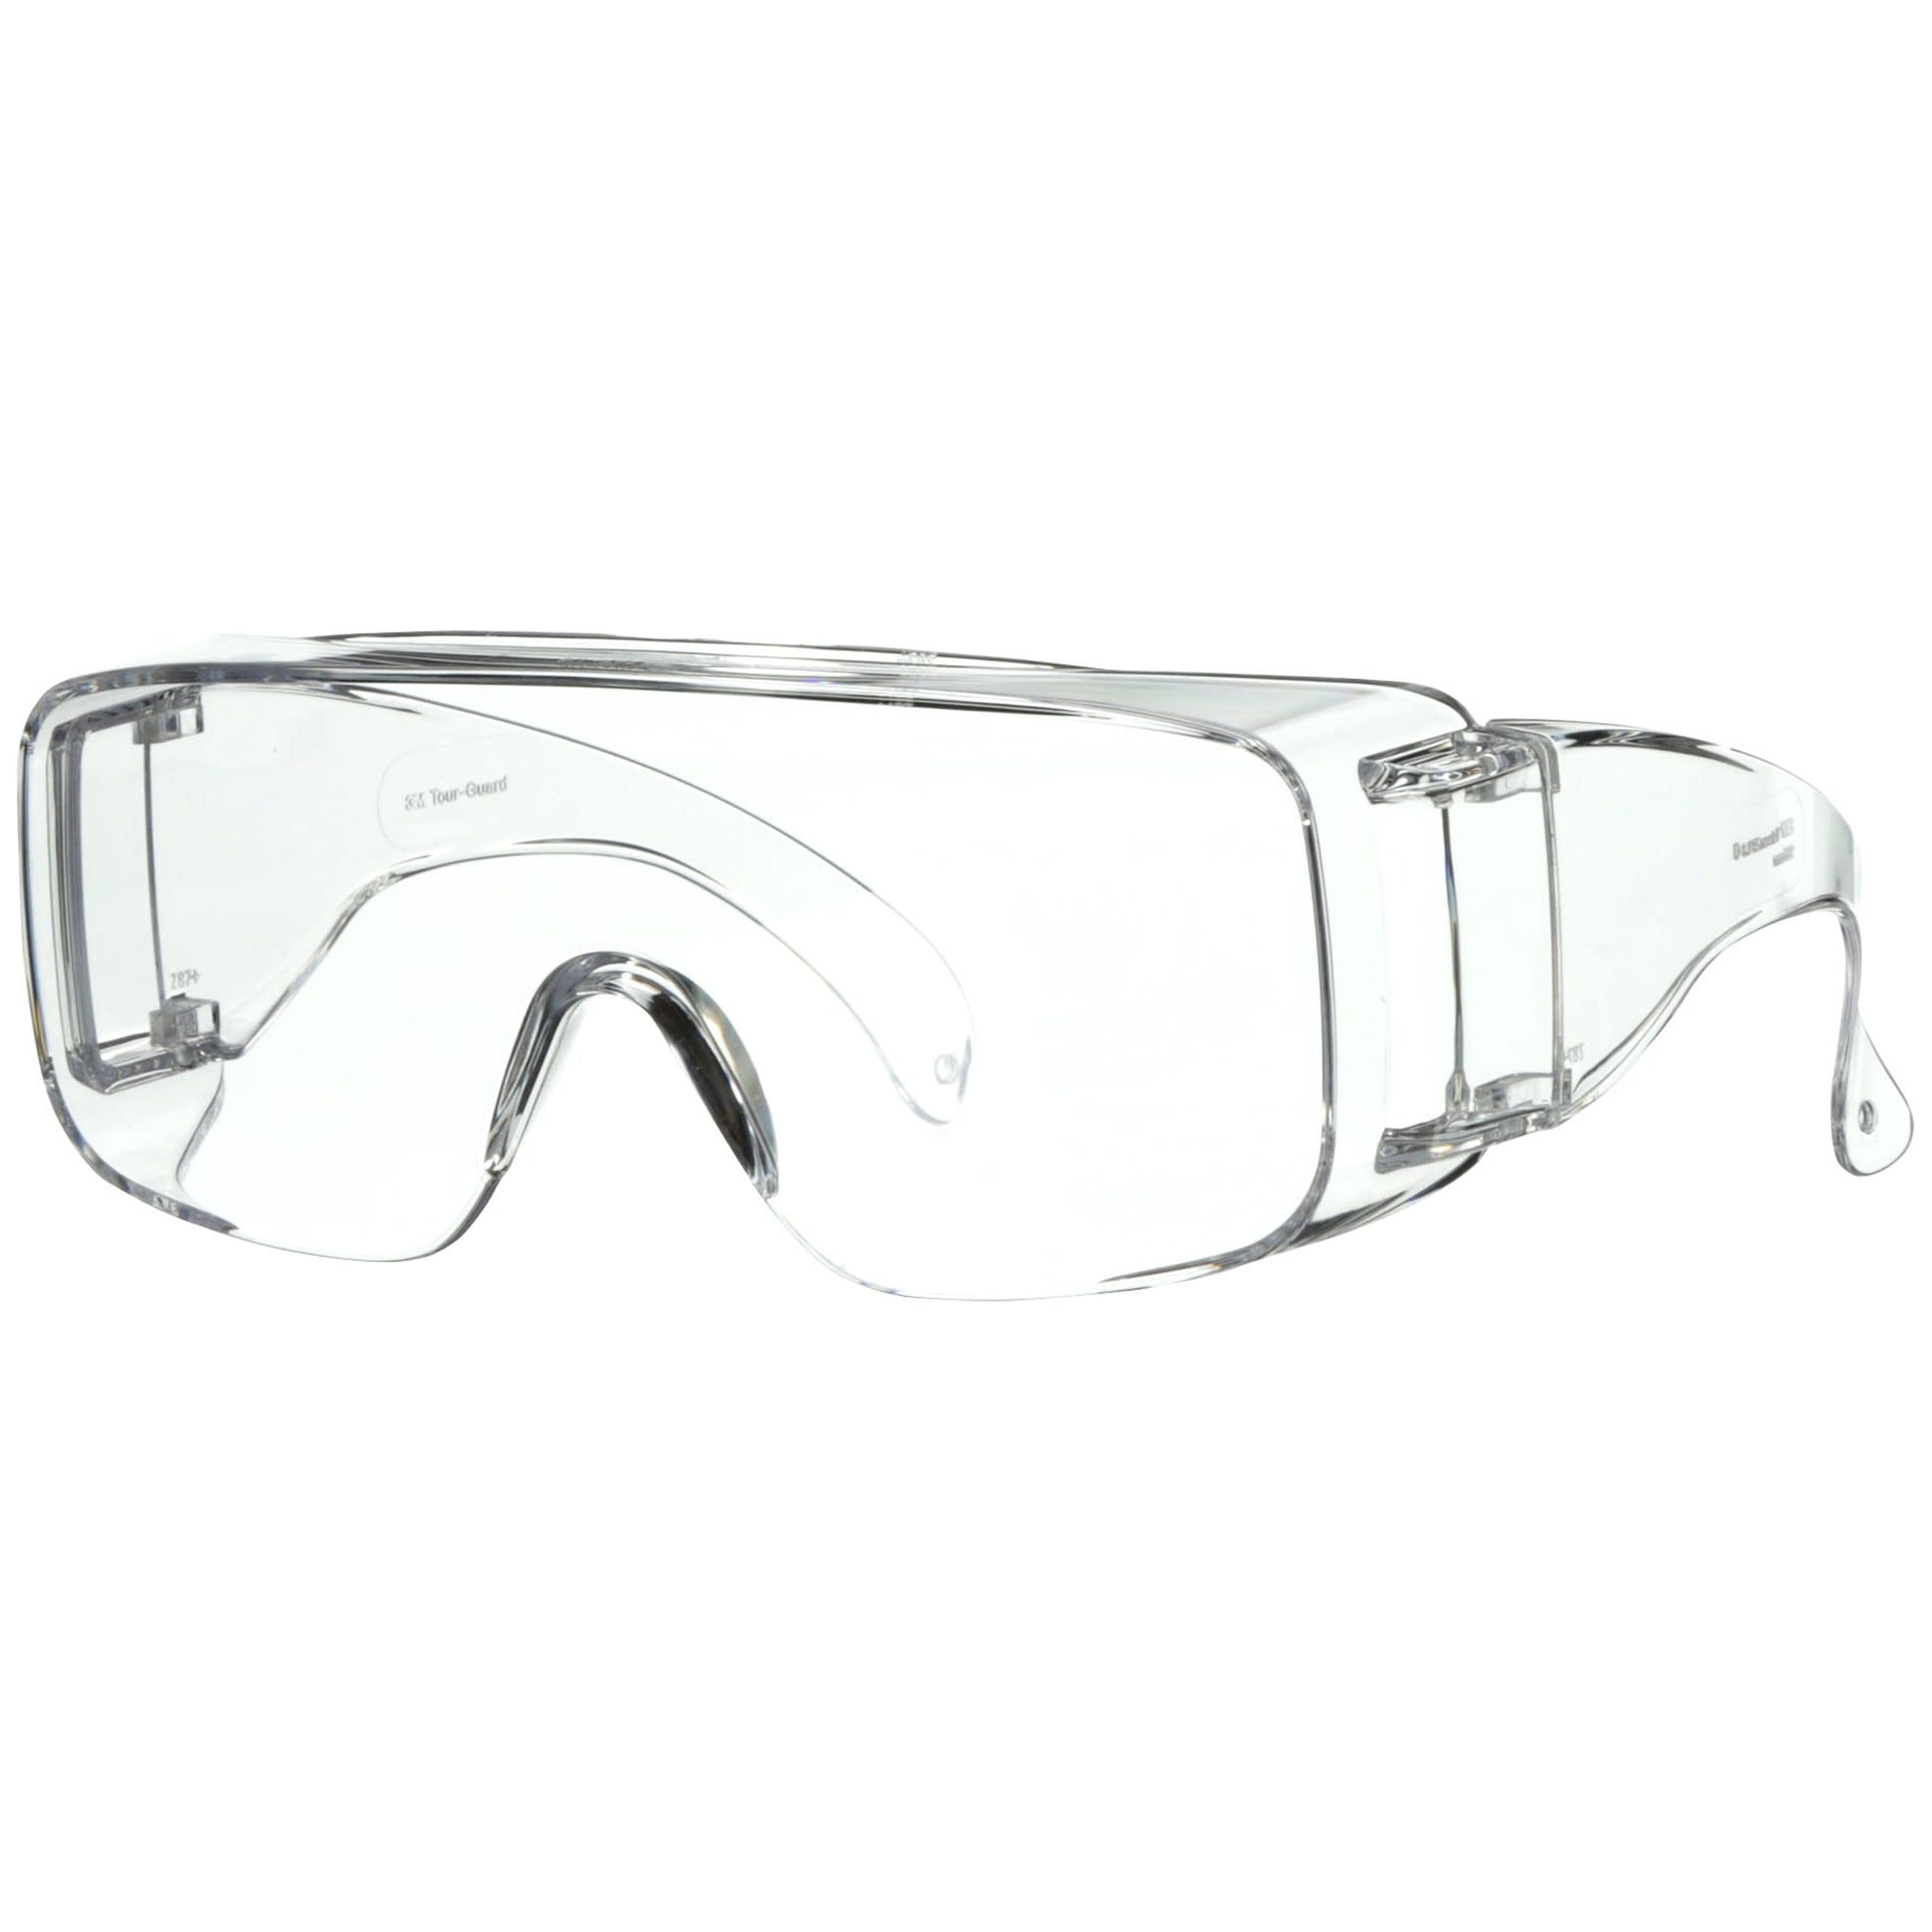 3M Over-the-Glass Clear Lens Eyewear Protection, Clear Frame - image 4 of 5